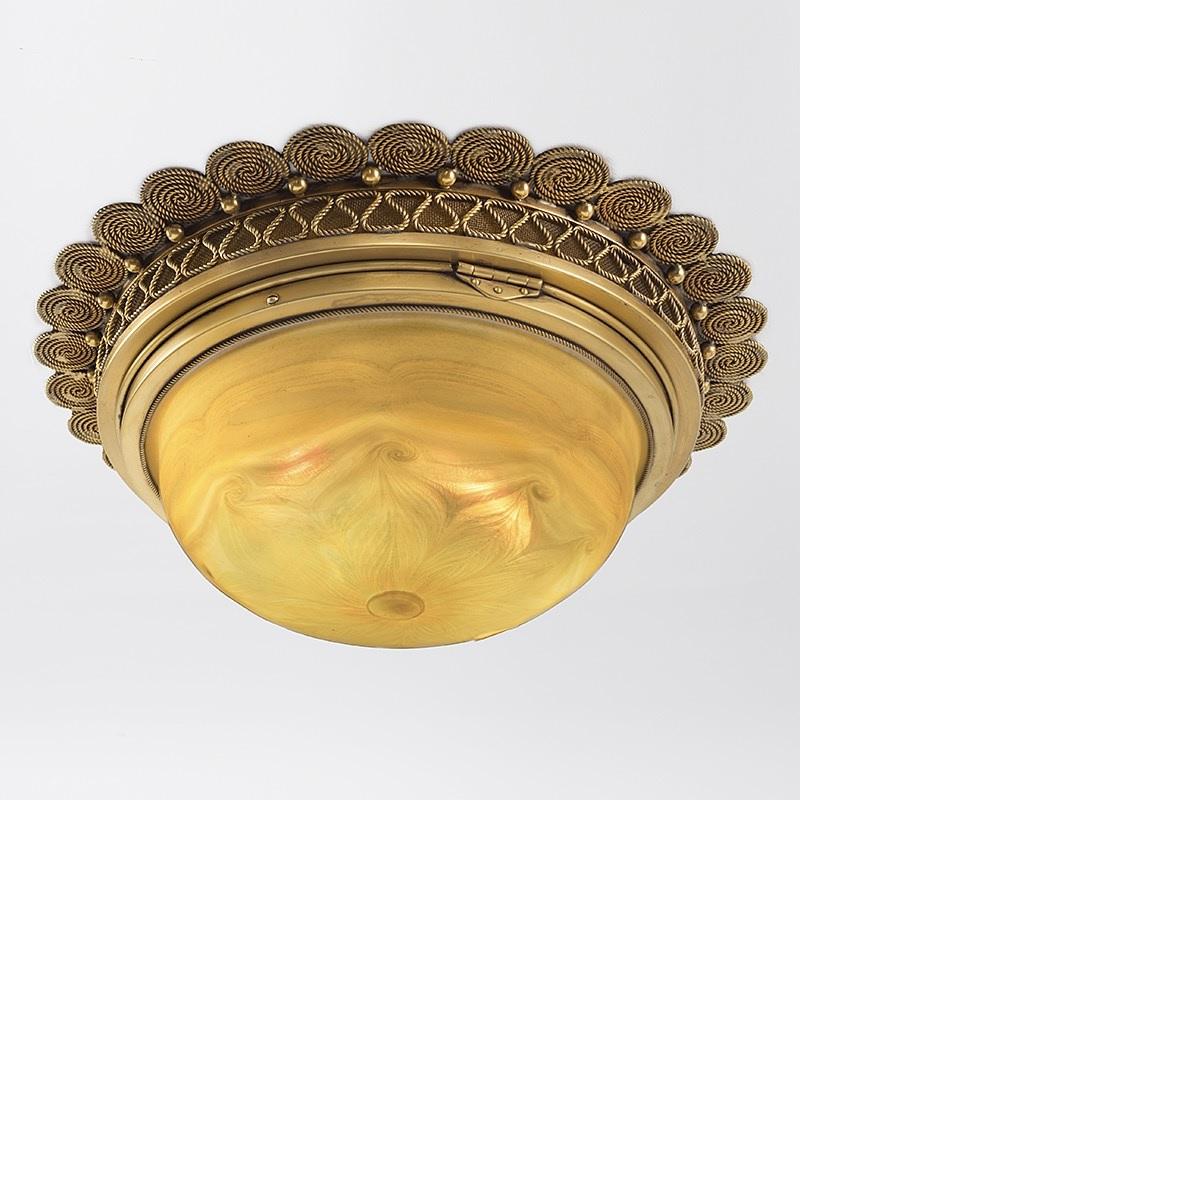 A Tiffany Studios New York favrile glass and gilt bronze ceiling fixture. Featuring a decorated favrile glass shade with iridescent pulled feather decoration, circa 1900. 

A similar shade is pictured in: Tiffany Lamps and Metalware: An